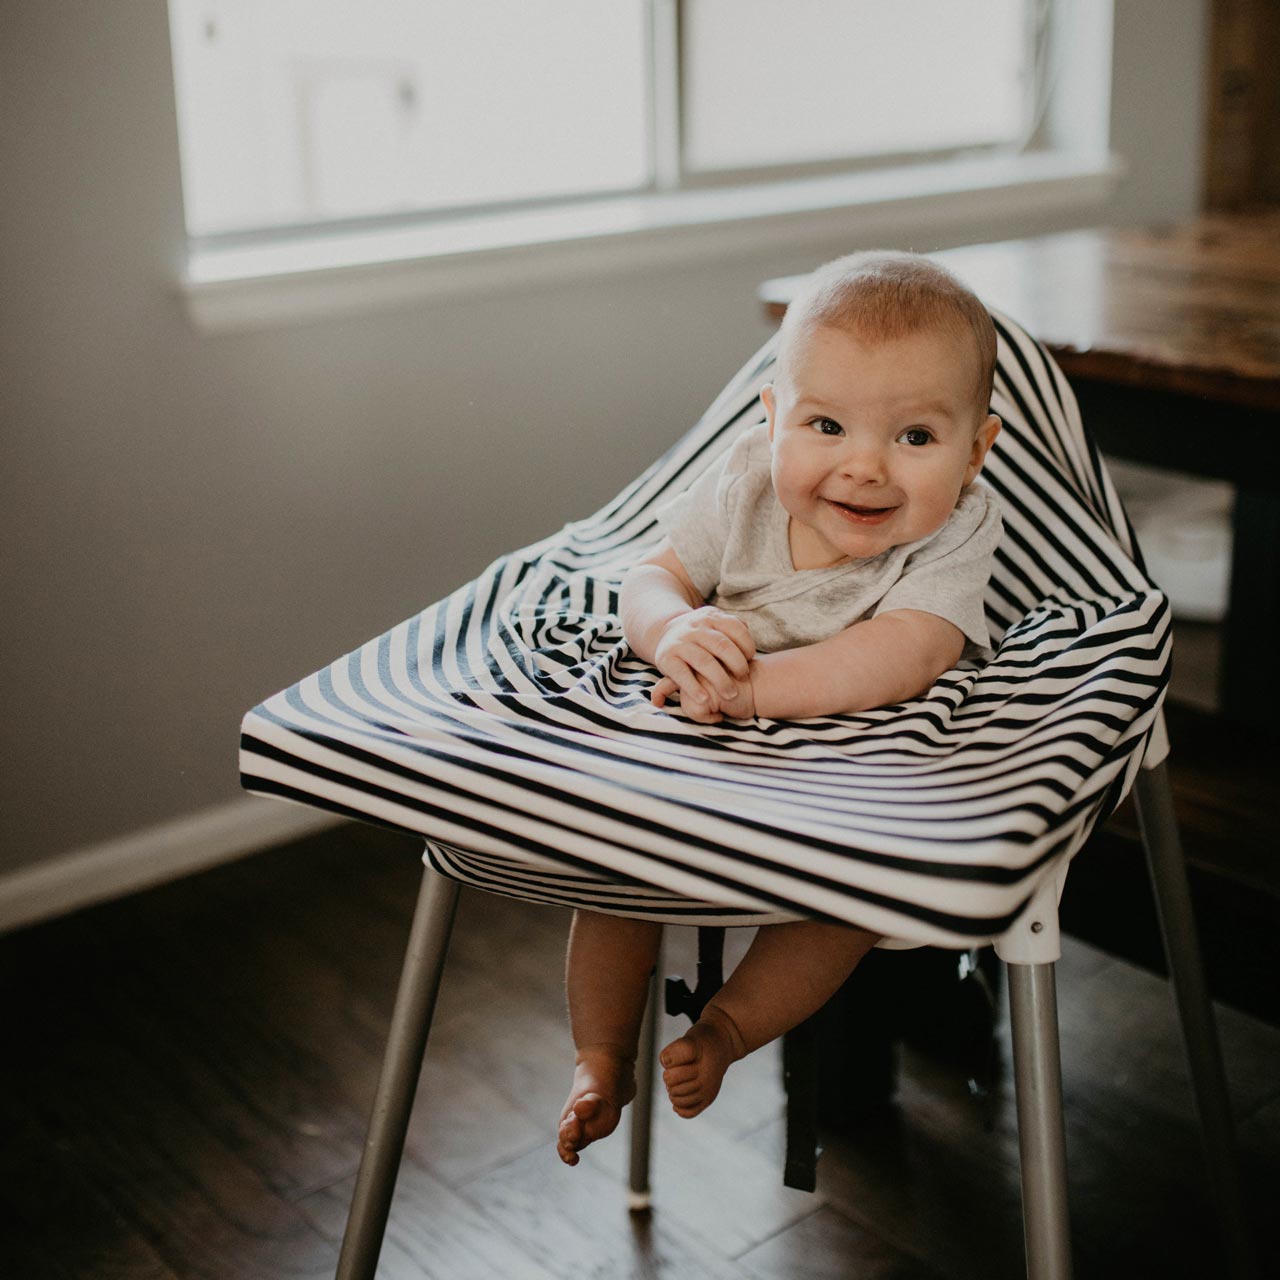  High Chair Cushion, High Chair Pad/seat Cushion/Baby High Chair  Cushion,Soft and Comfortable,Light and Breathable,Make The Baby More  Comfortable (Gray Background Stars Pattern) : Baby